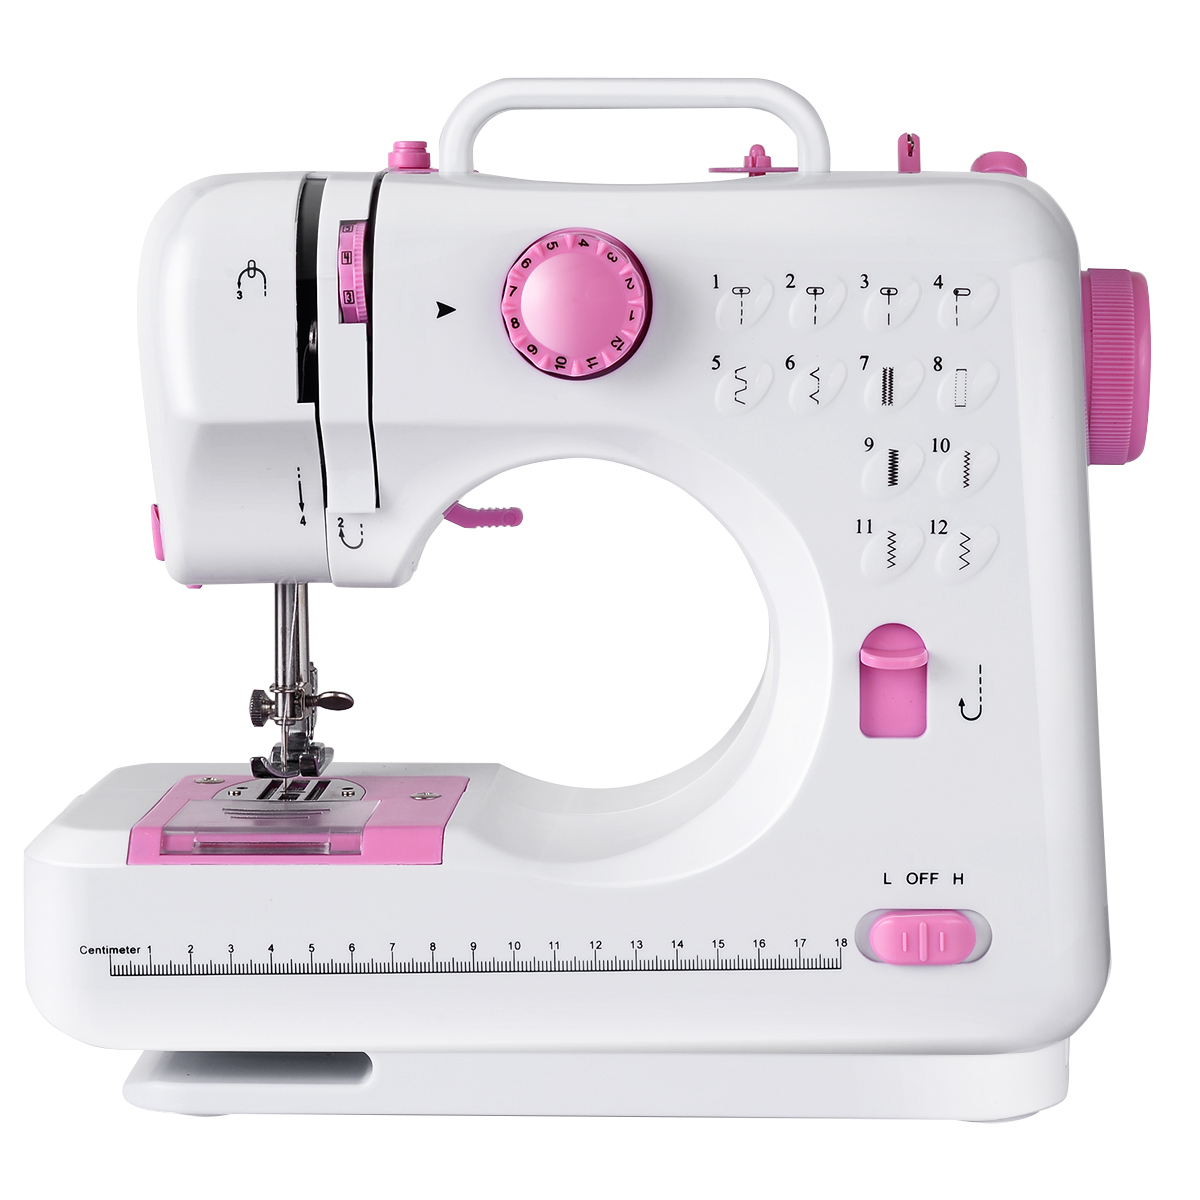 Costway Sewing Machine Free-Arm Crafting Mending Machine with 12 Built-In Stitched White - image 1 of 10